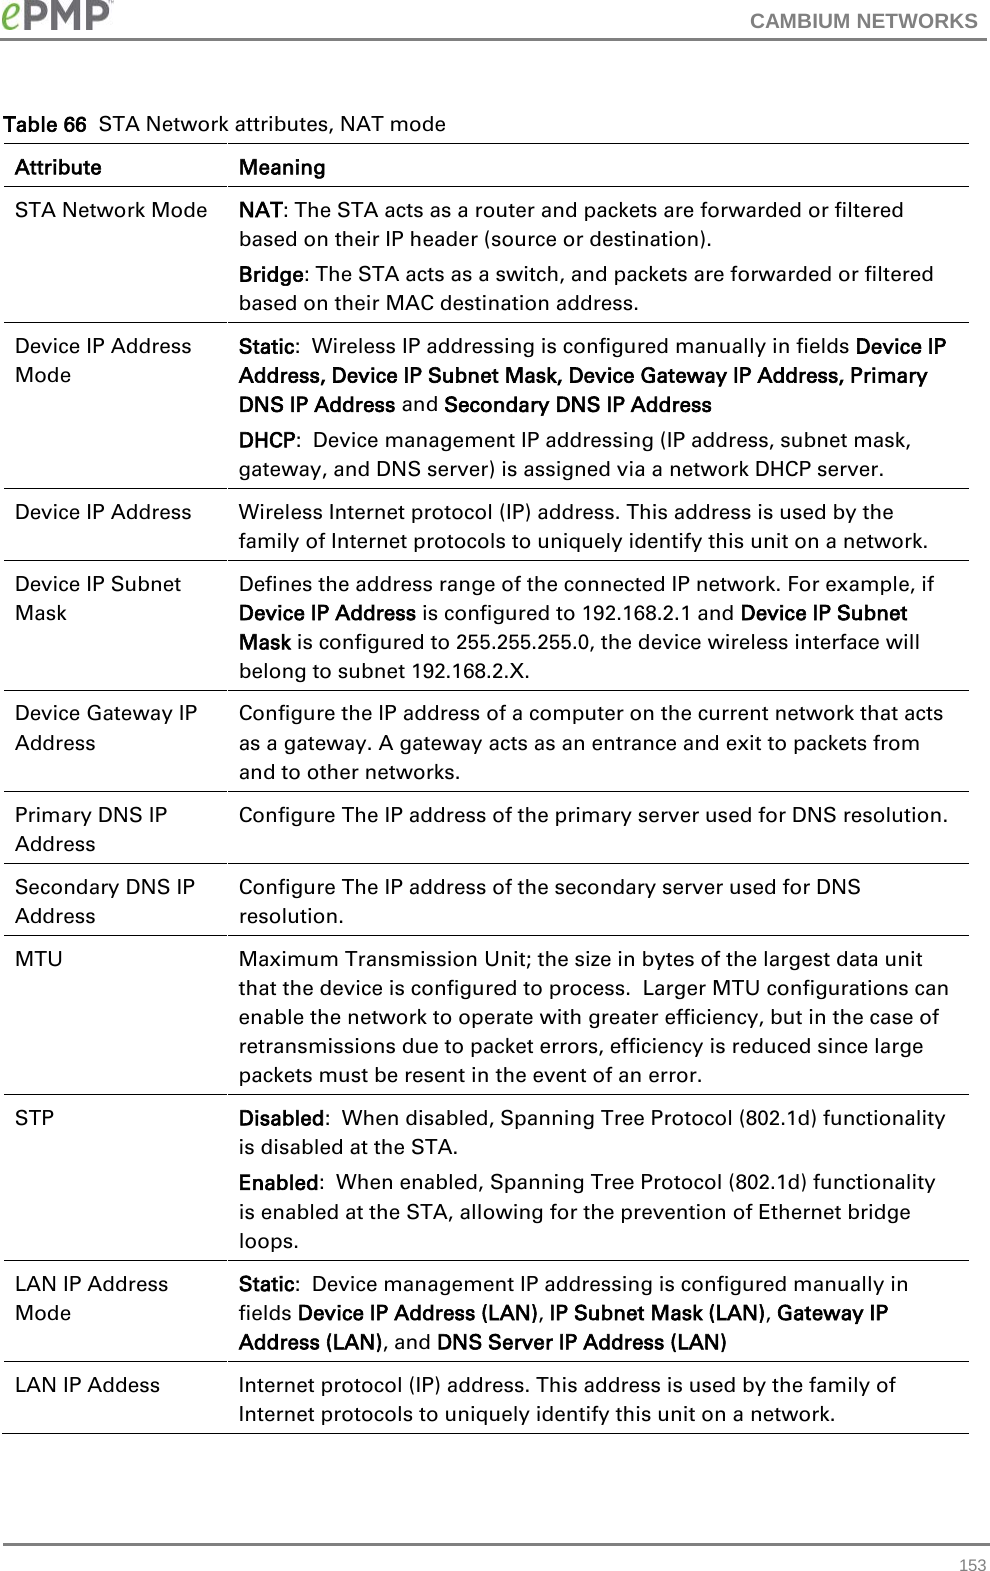 CAMBIUM NETWORKS  Table 66  STA Network attributes, NAT mode Attribute Meaning STA Network Mode NAT: The STA acts as a router and packets are forwarded or filtered based on their IP header (source or destination). Bridge: The STA acts as a switch, and packets are forwarded or filtered based on their MAC destination address. Device IP Address Mode Static:  Wireless IP addressing is configured manually in fields Device IP Address, Device IP Subnet Mask, Device Gateway IP Address, Primary DNS IP Address and Secondary DNS IP Address DHCP:  Device management IP addressing (IP address, subnet mask, gateway, and DNS server) is assigned via a network DHCP server. Device IP Address Wireless Internet protocol (IP) address. This address is used by the family of Internet protocols to uniquely identify this unit on a network. Device IP Subnet Mask Defines the address range of the connected IP network. For example, if Device IP Address is configured to 192.168.2.1 and Device IP Subnet Mask is configured to 255.255.255.0, the device wireless interface will belong to subnet 192.168.2.X. Device Gateway IP Address Configure the IP address of a computer on the current network that acts as a gateway. A gateway acts as an entrance and exit to packets from and to other networks. Primary DNS IP Address Configure The IP address of the primary server used for DNS resolution. Secondary DNS IP Address Configure The IP address of the secondary server used for DNS resolution. MTU Maximum Transmission Unit; the size in bytes of the largest data unit that the device is configured to process.  Larger MTU configurations can enable the network to operate with greater efficiency, but in the case of retransmissions due to packet errors, efficiency is reduced since large packets must be resent in the event of an error. STP Disabled:  When disabled, Spanning Tree Protocol (802.1d) functionality is disabled at the STA. Enabled:  When enabled, Spanning Tree Protocol (802.1d) functionality is enabled at the STA, allowing for the prevention of Ethernet bridge loops. LAN IP Address Mode Static:  Device management IP addressing is configured manually in fields Device IP Address (LAN), IP Subnet Mask (LAN), Gateway IP Address (LAN), and DNS Server IP Address (LAN) LAN IP Addess Internet protocol (IP) address. This address is used by the family of Internet protocols to uniquely identify this unit on a network.  153 